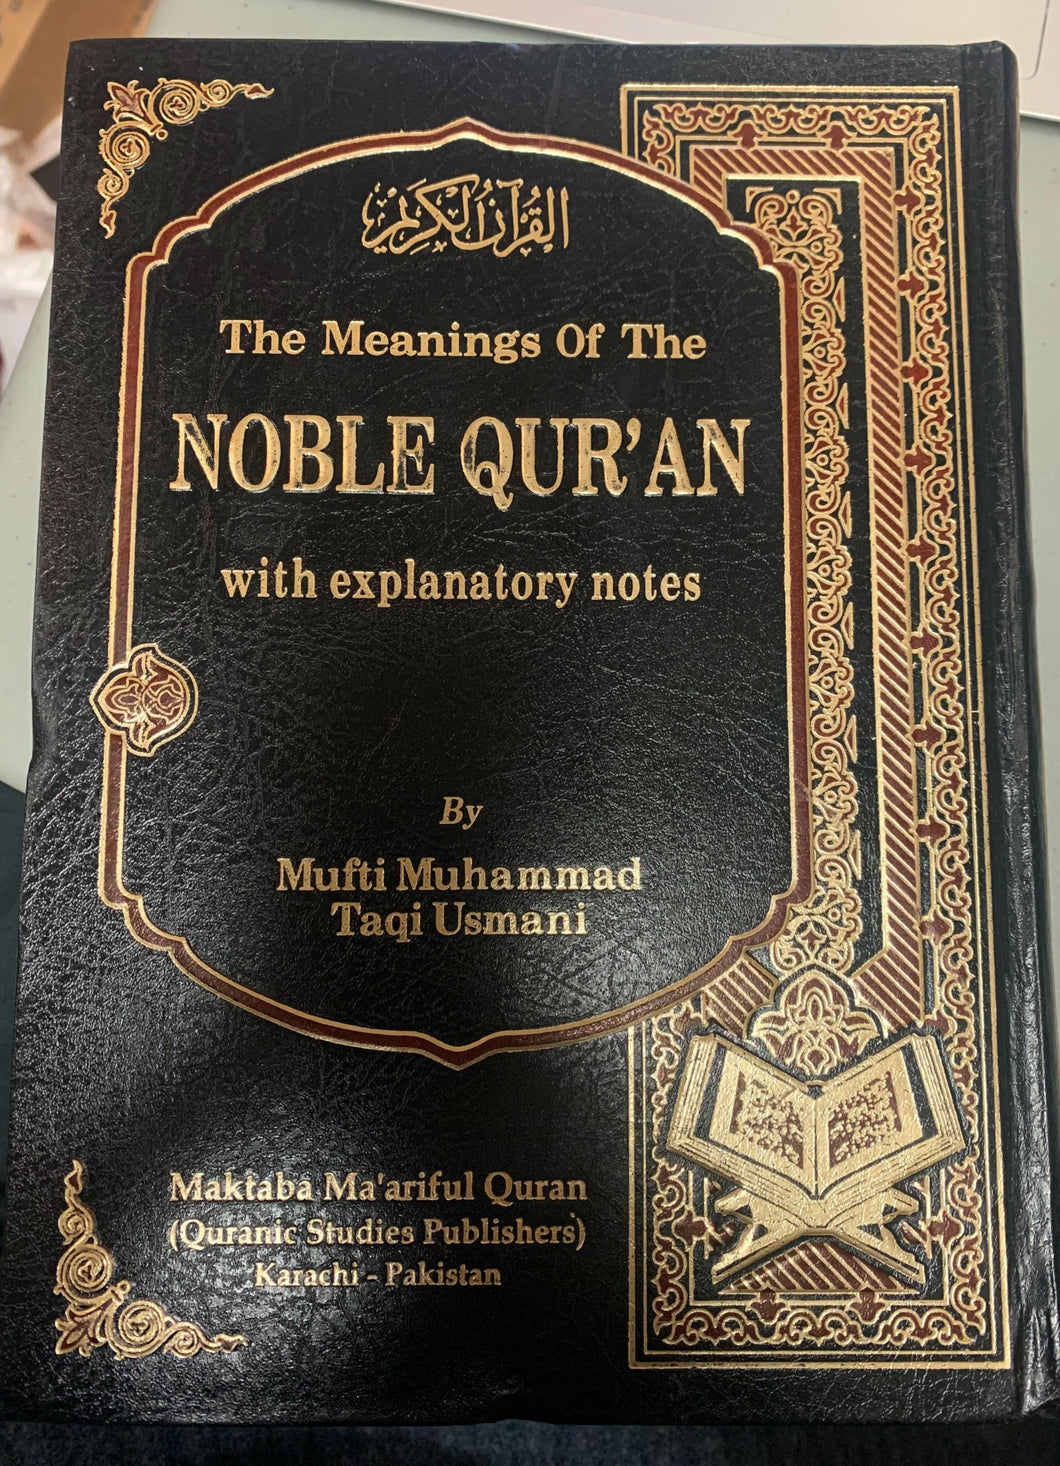 The Meaning of the Noble Quran (Explanatory Notes)